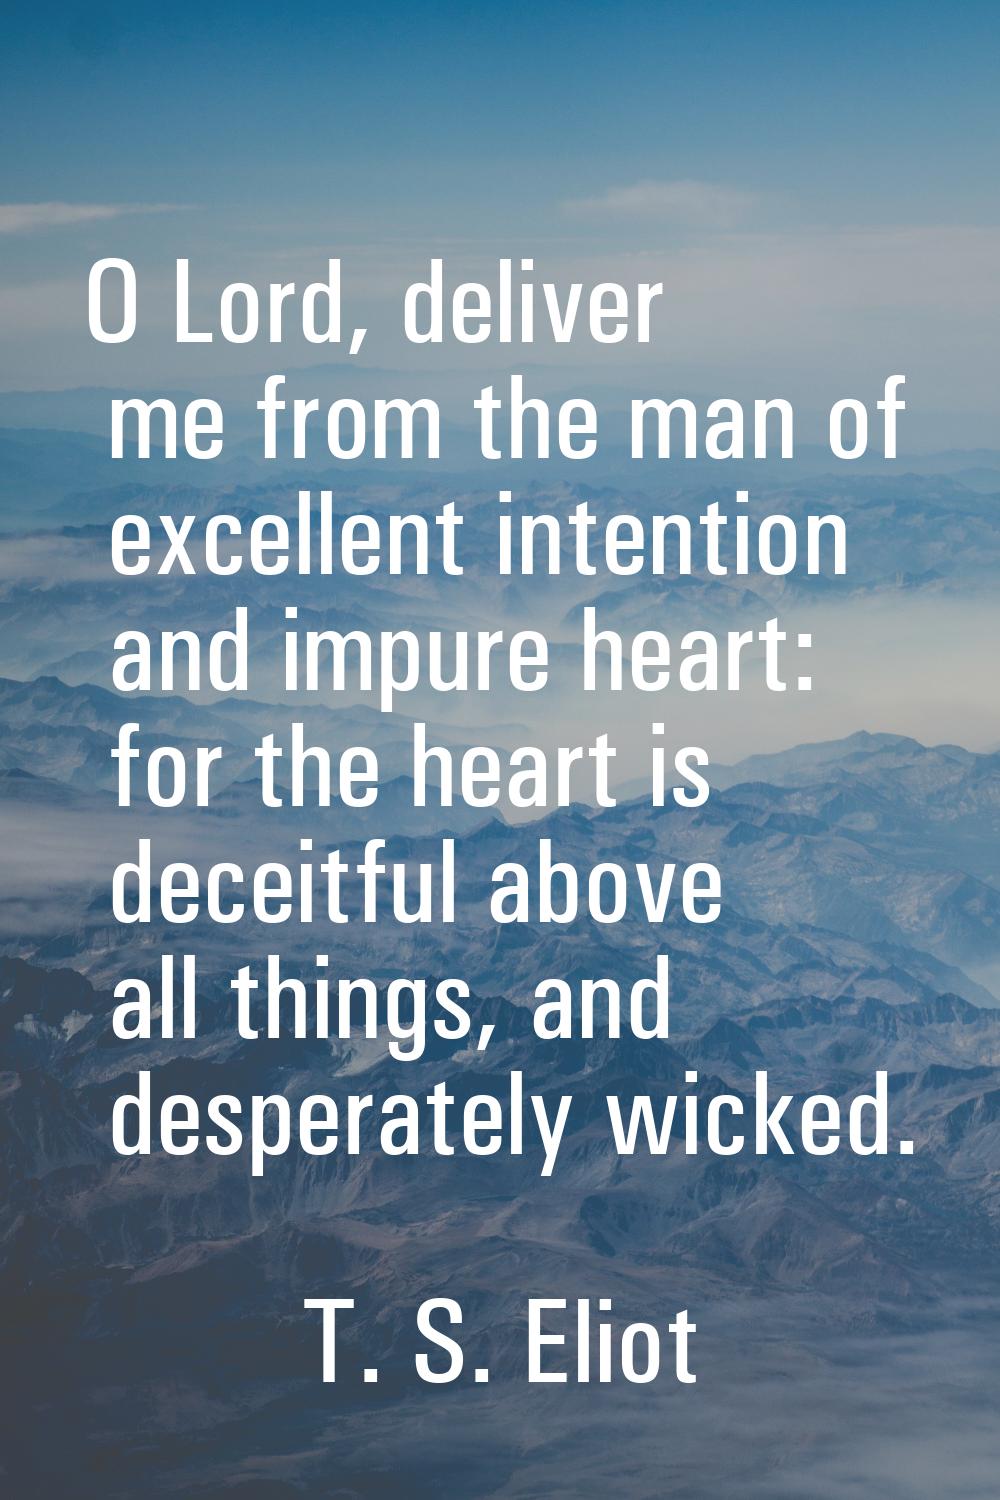 O Lord, deliver me from the man of excellent intention and impure heart: for the heart is deceitful